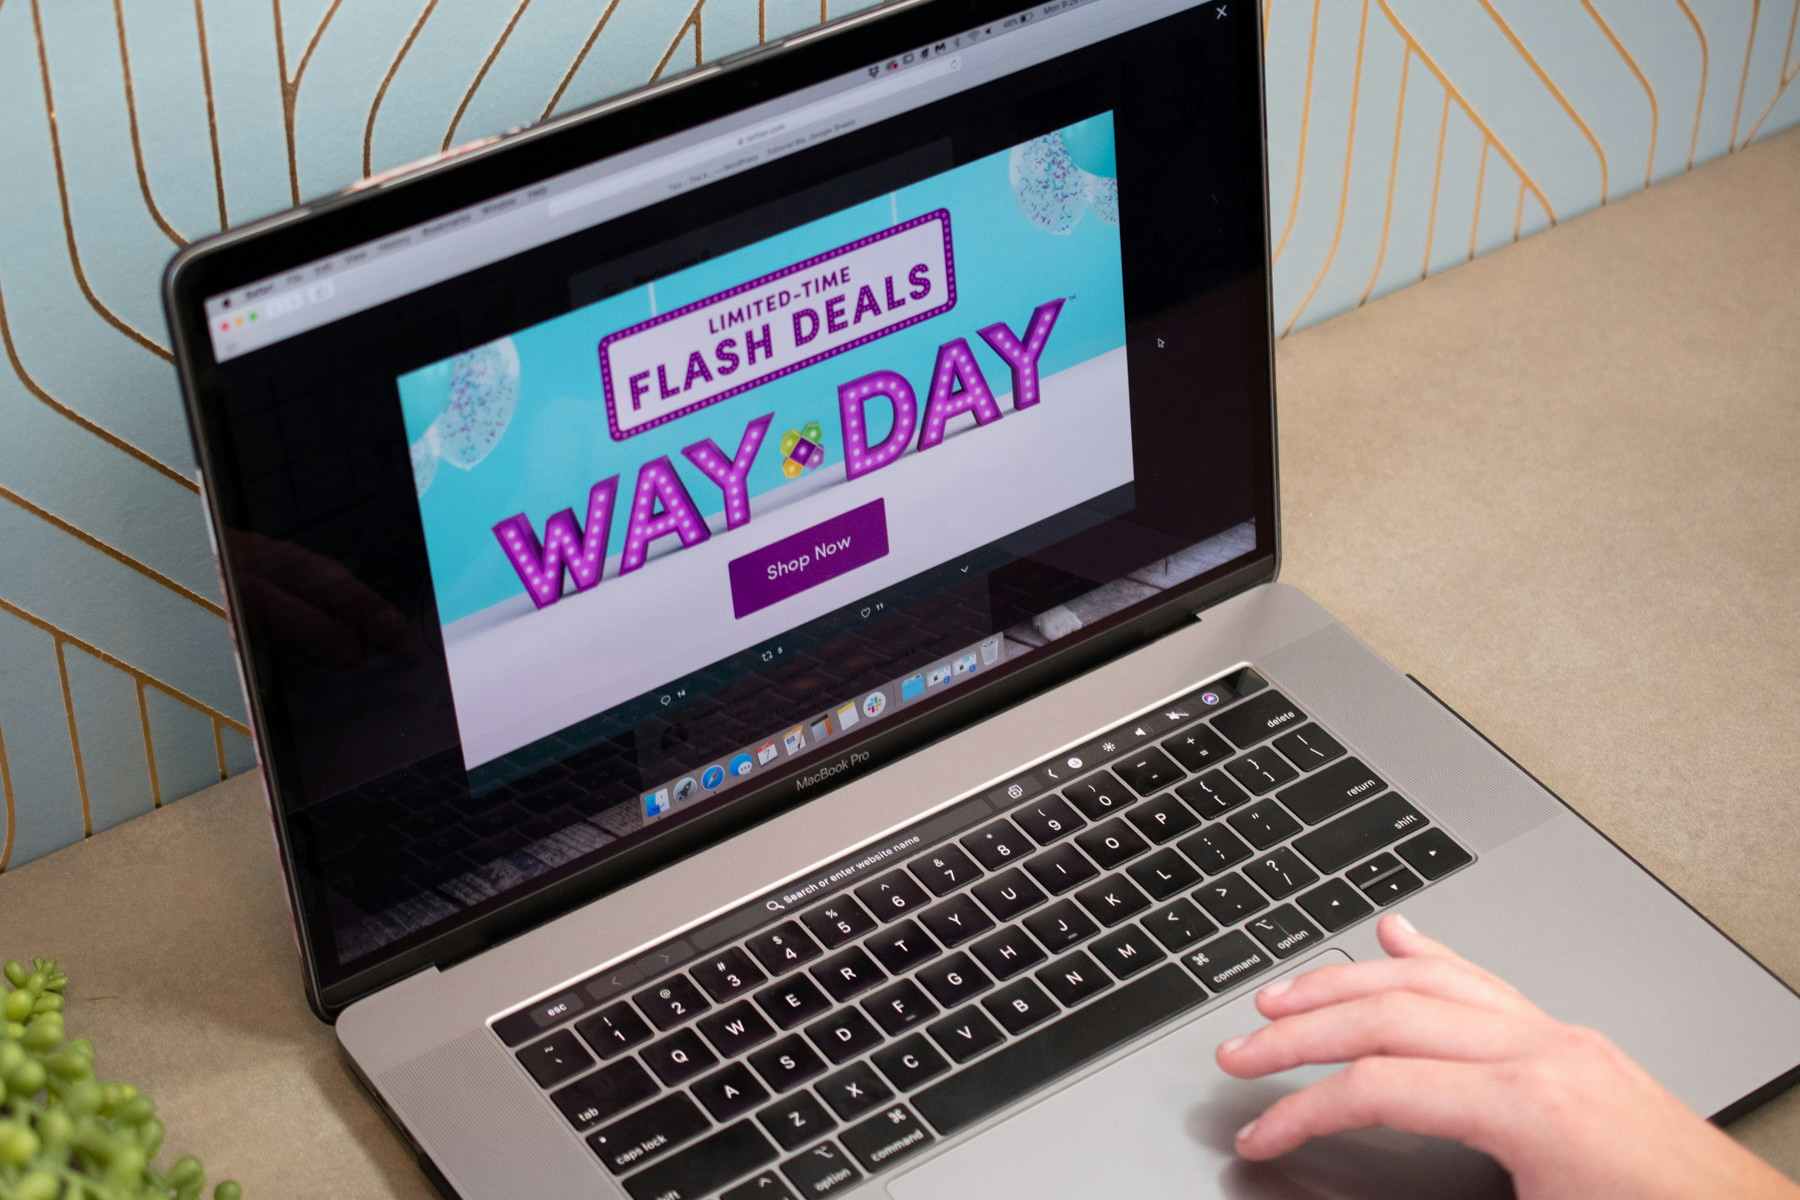 person on laptop browsing wayfair way day limited-time flash deals